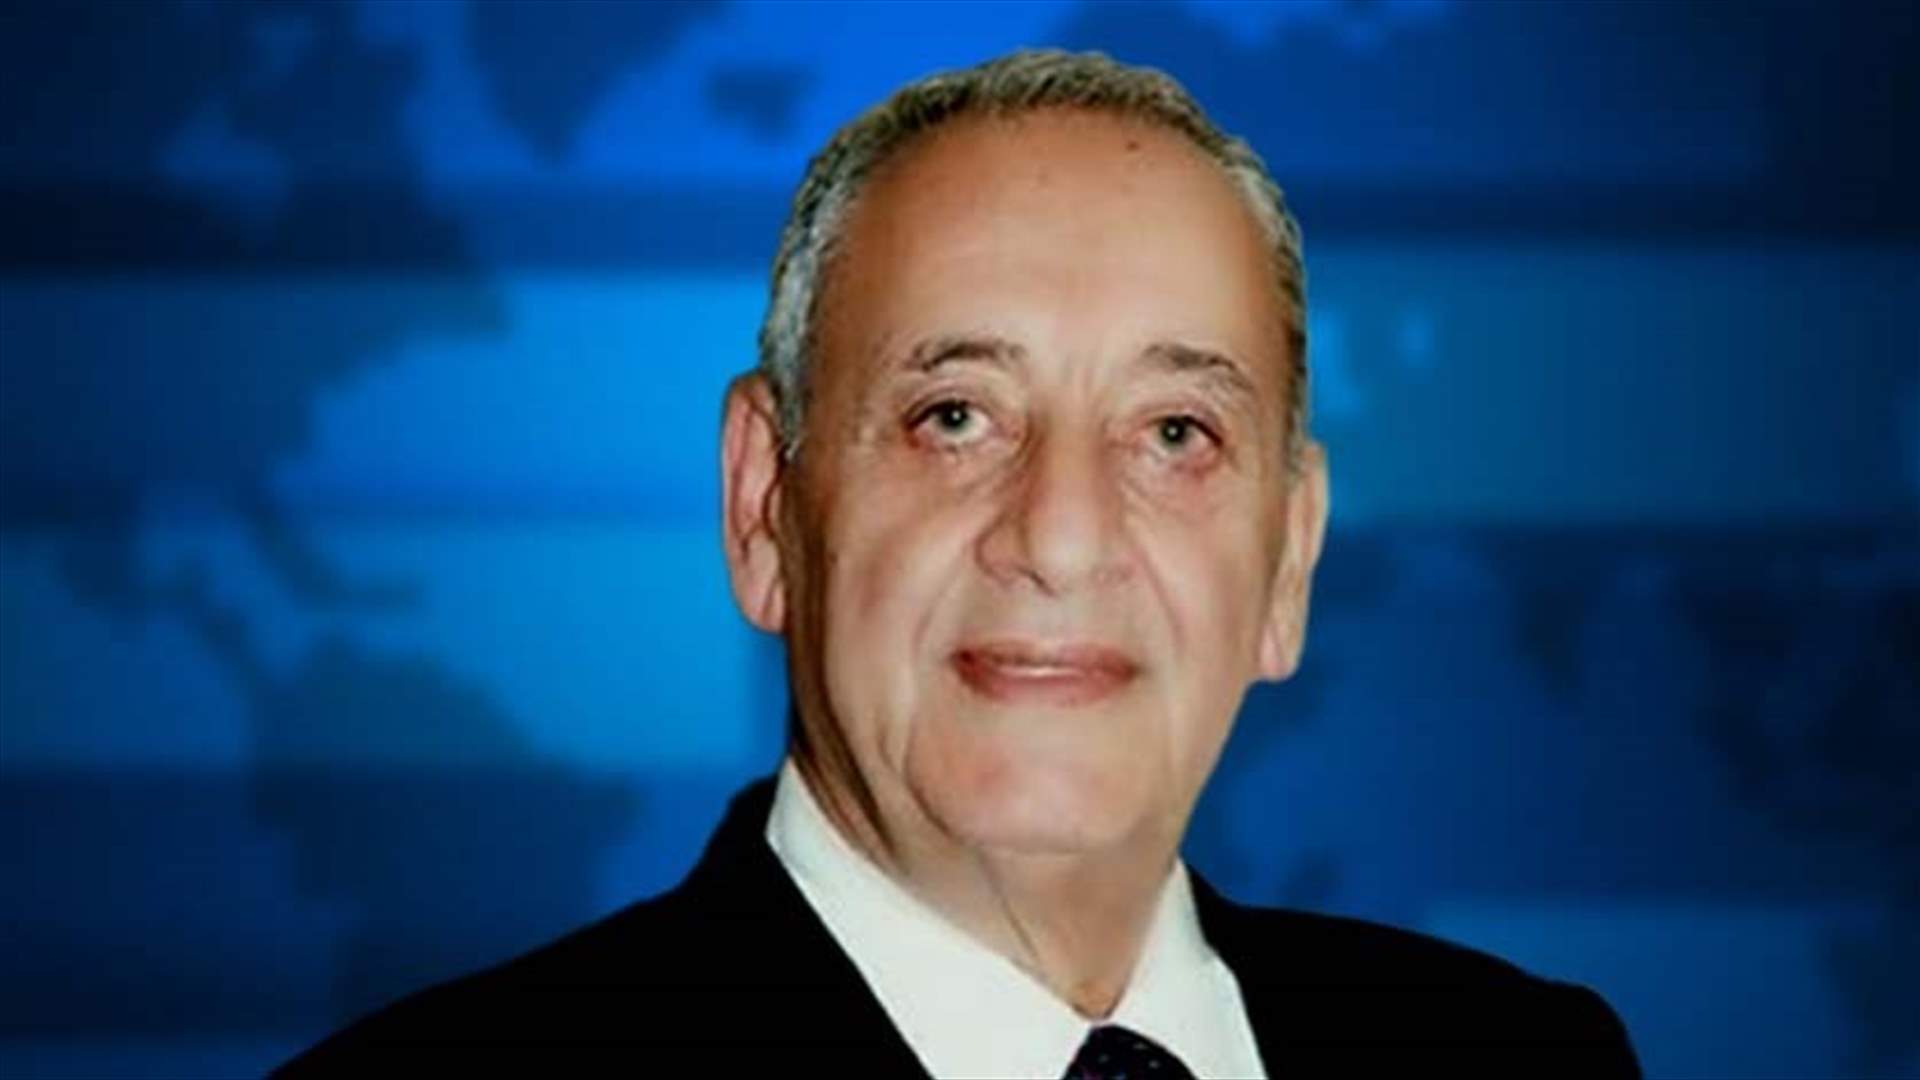 Berri from Cairo: Lebanon’s security situation is stable